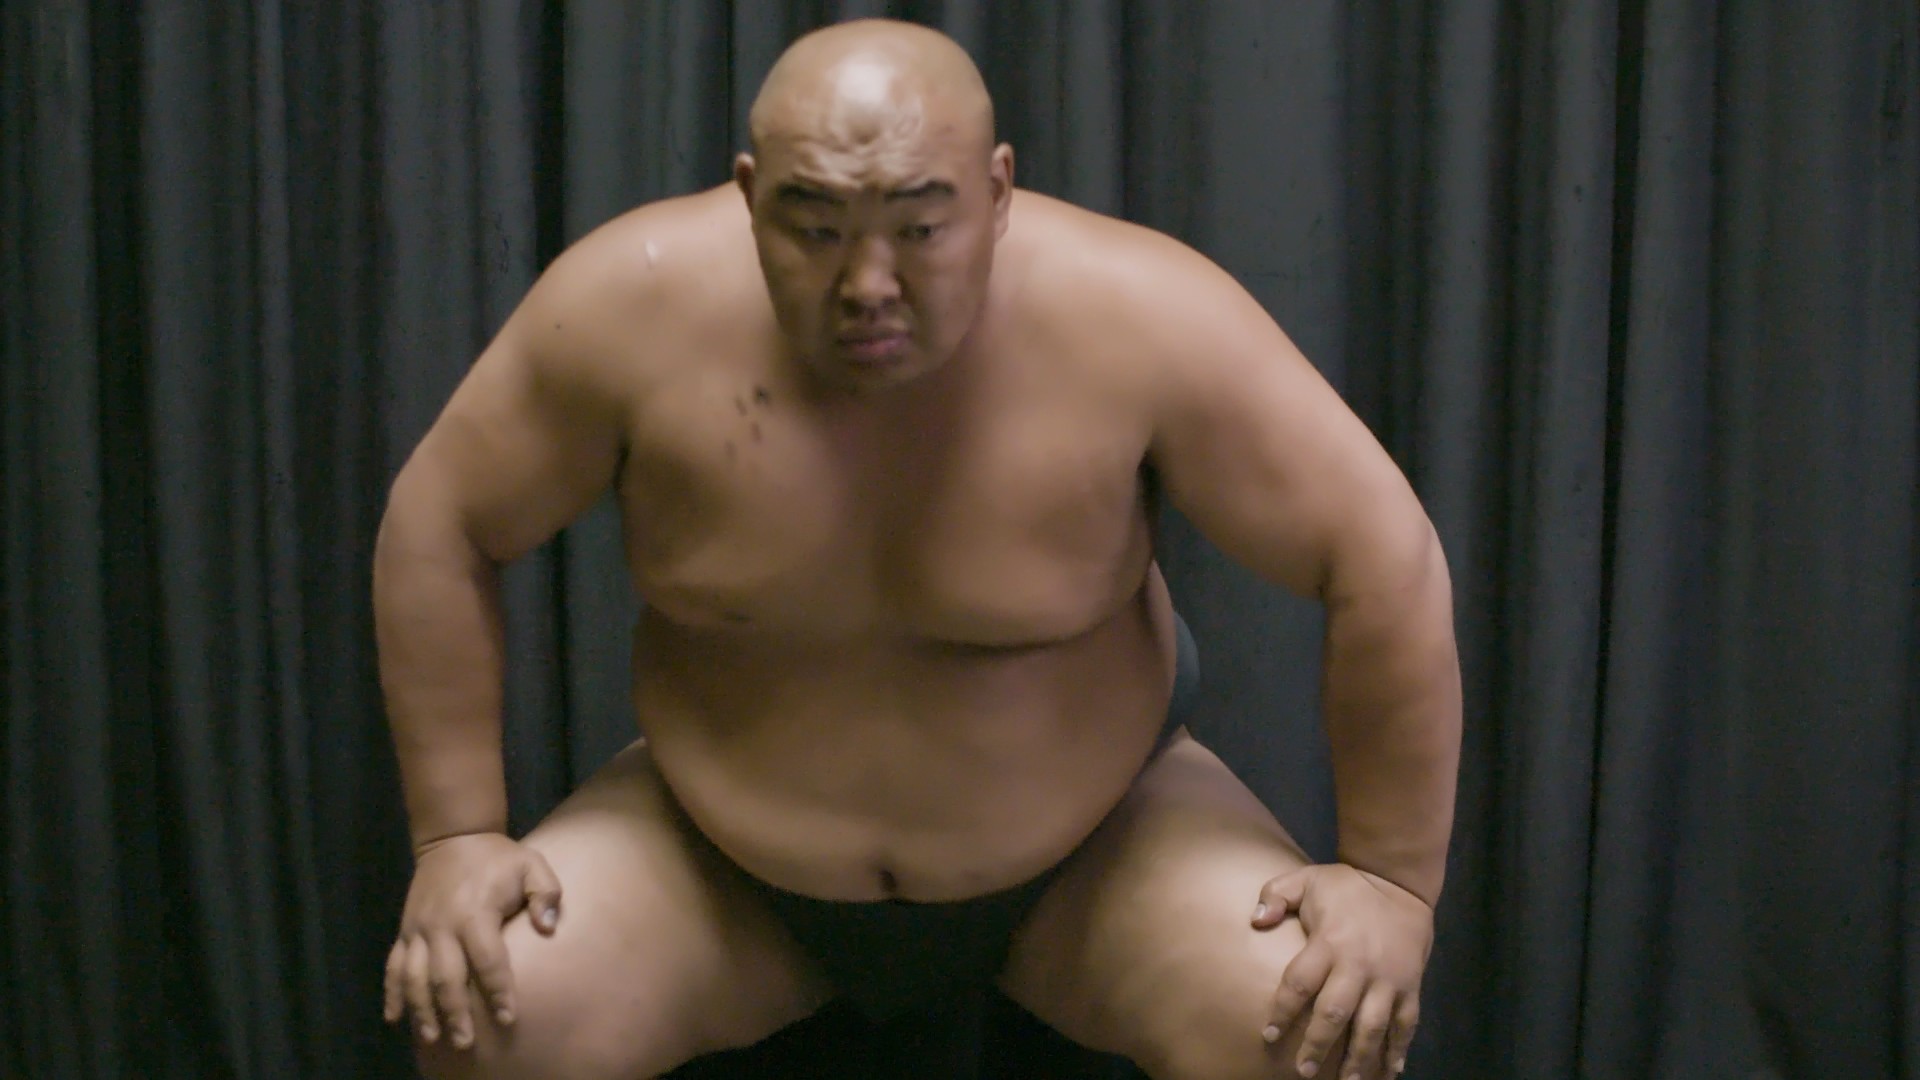 A National Embarrassment': Japanese Sumo Wrestling Is Plagued by